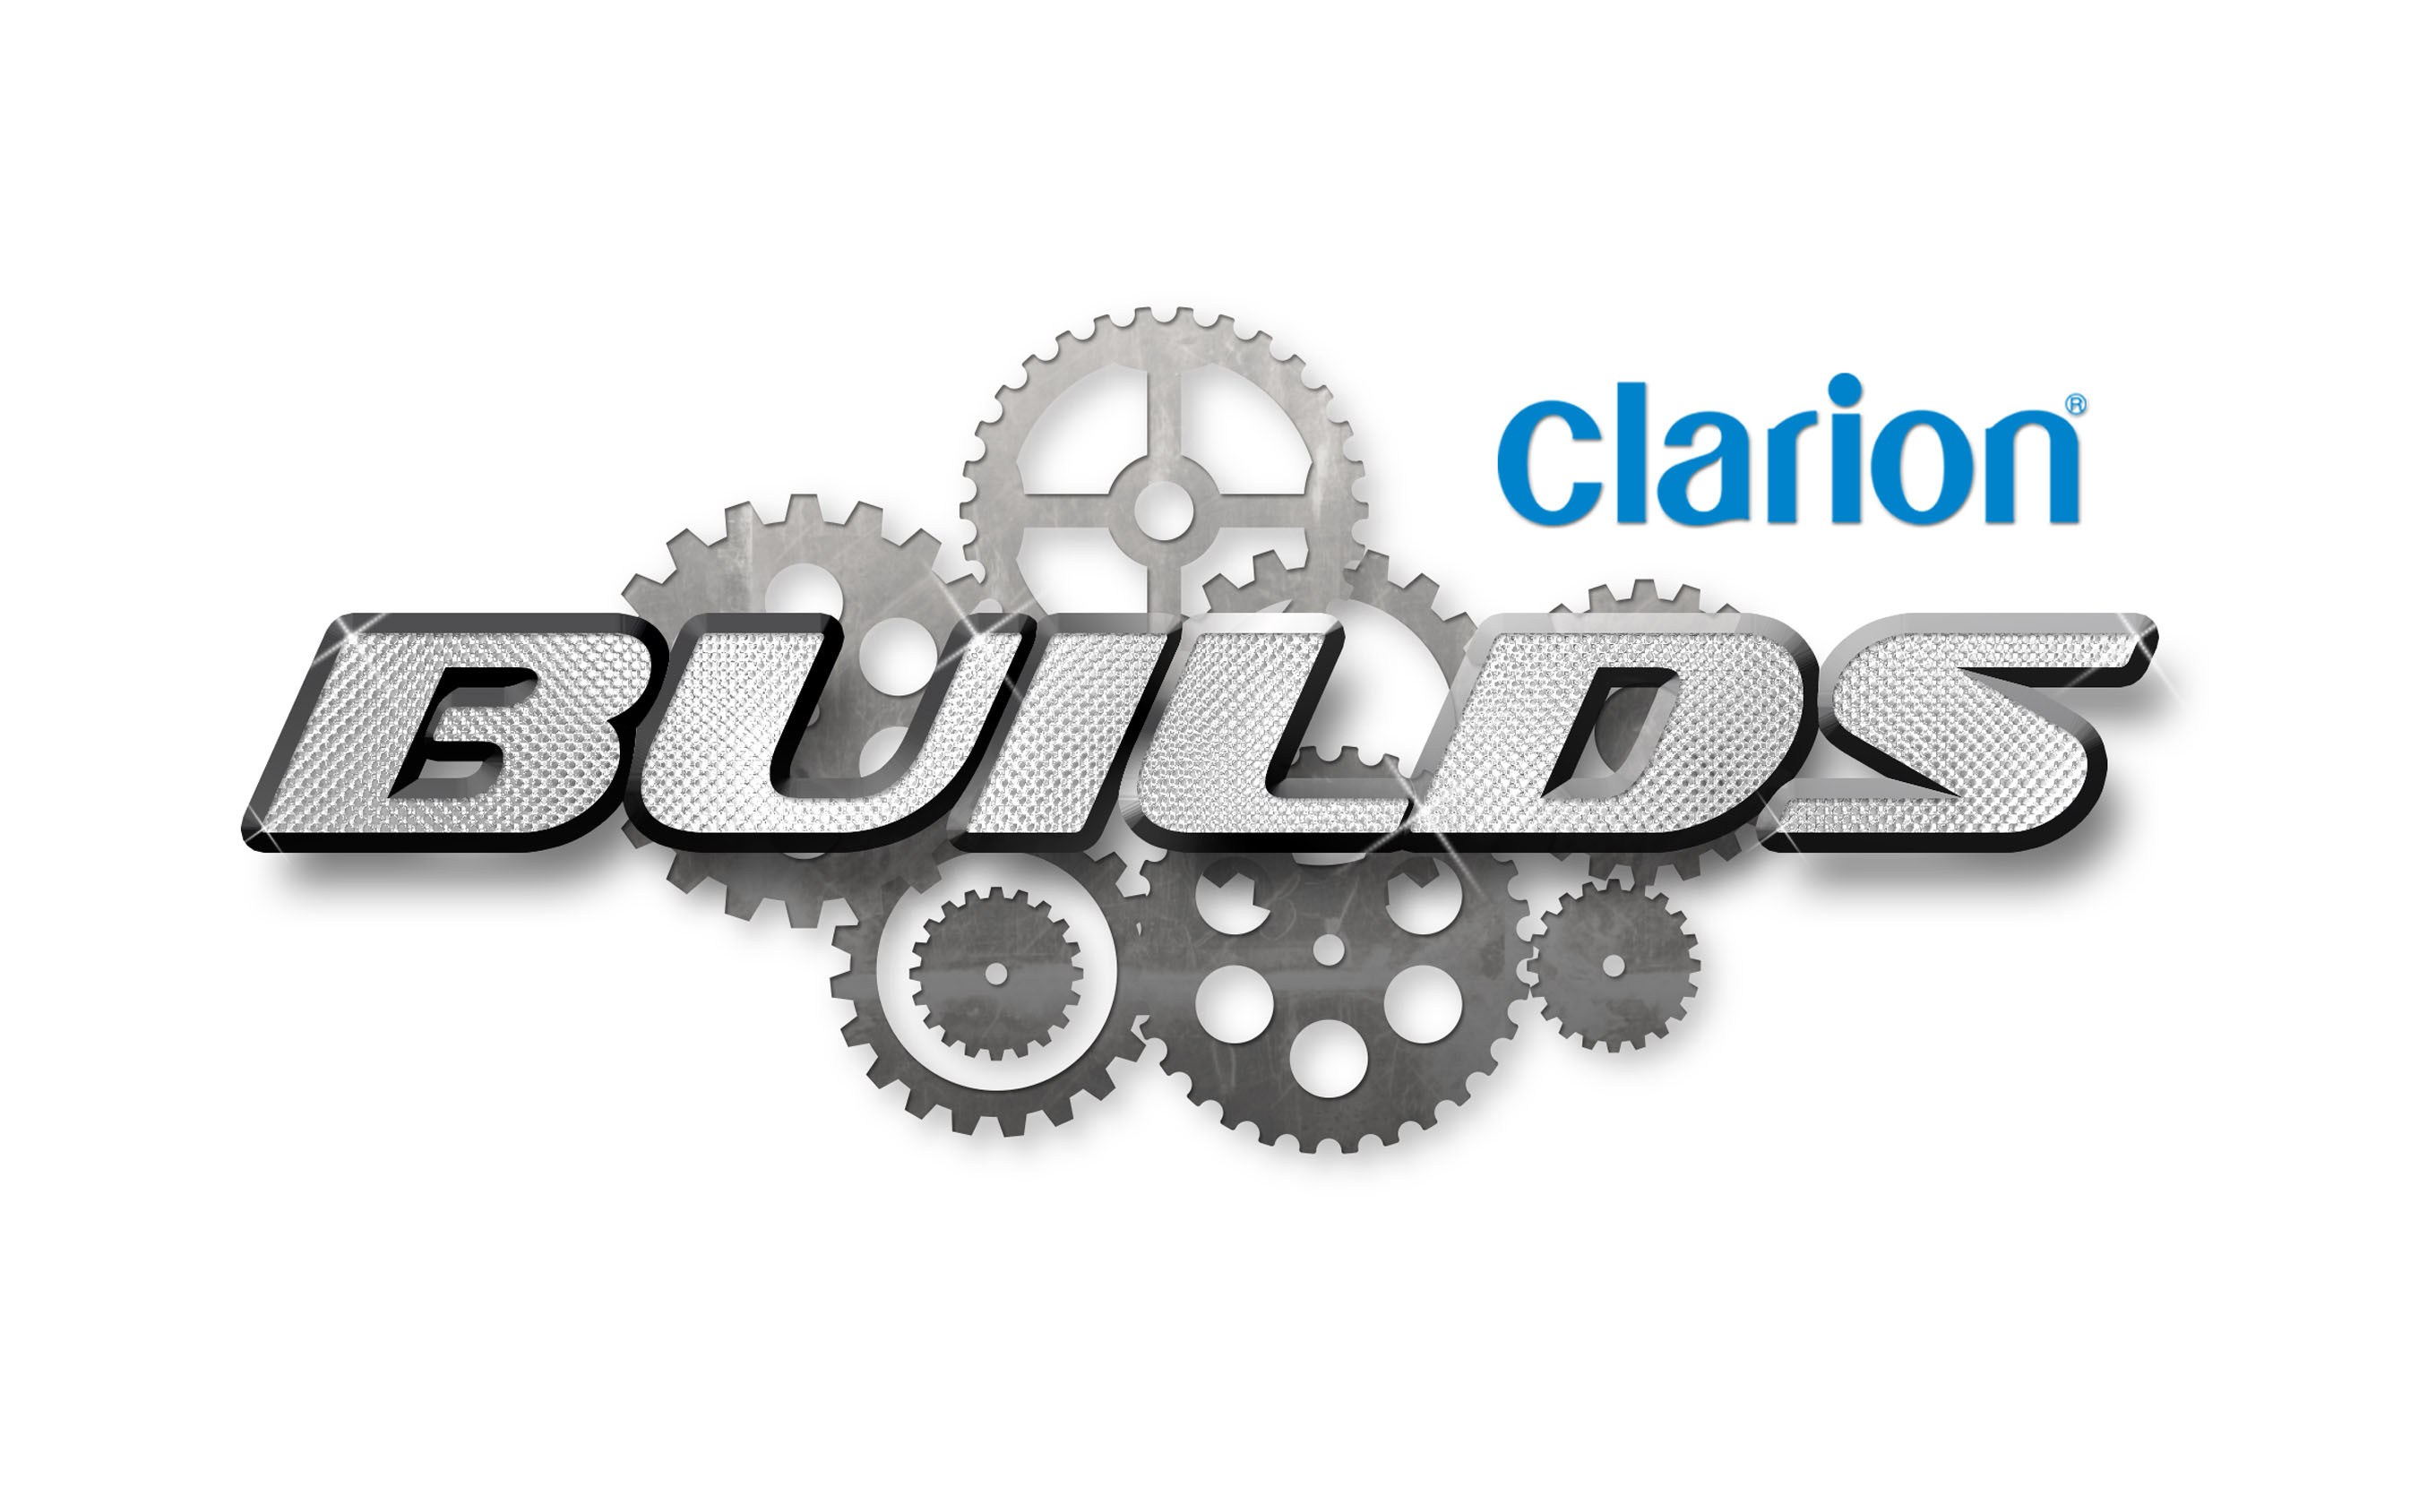 Clarion Builds is an innovative marketing program initiated by Clarion Corporation of America to tackle unique restoration projects of iconic cars and trucks in cooperation with key partners hand-selected for each individual project. The program is designed to connect with new and existing fans who are car enthusiasts, automotive sports fans, journalists, historians, and anyone with an interest in design and style, through a mix of social and traditional media. http://www.clarionbuilds.com